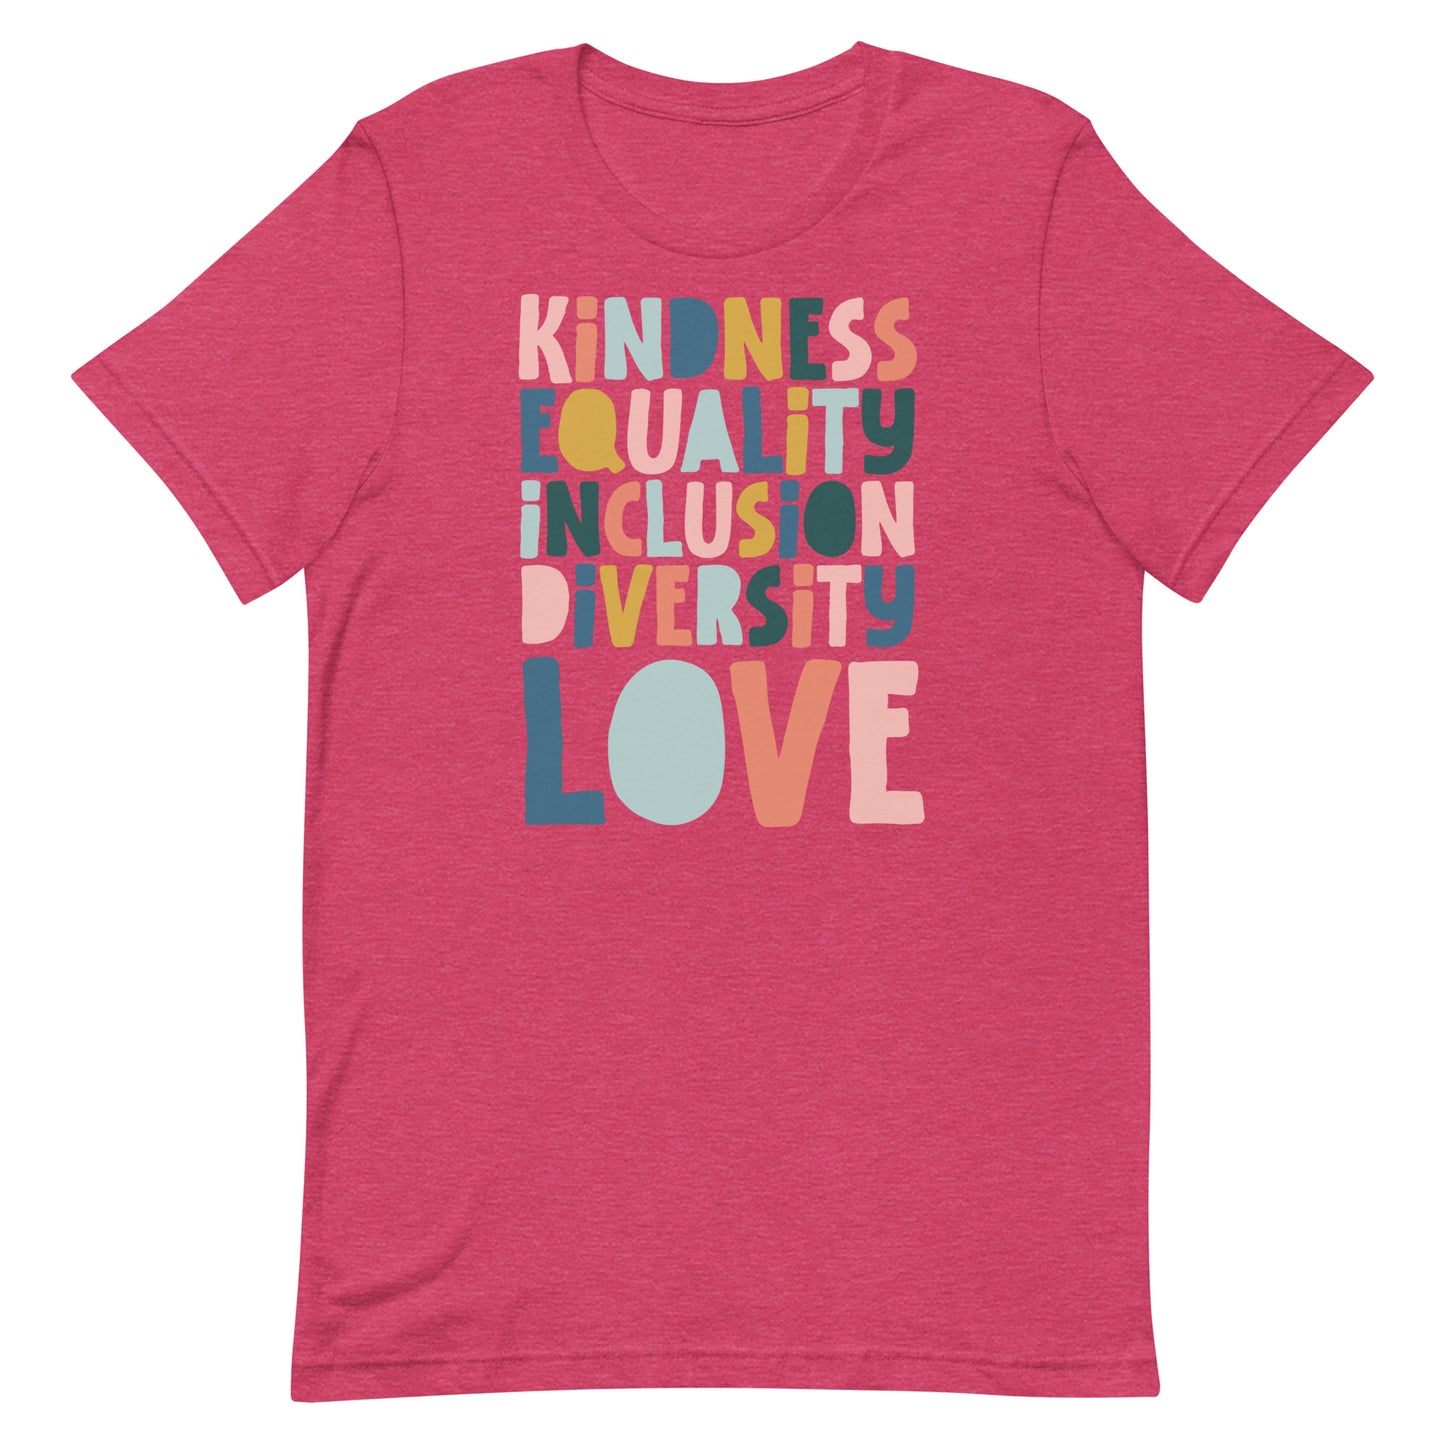 Kindness Teacher Tshirt: Inclusion & Love Tee for Heroes